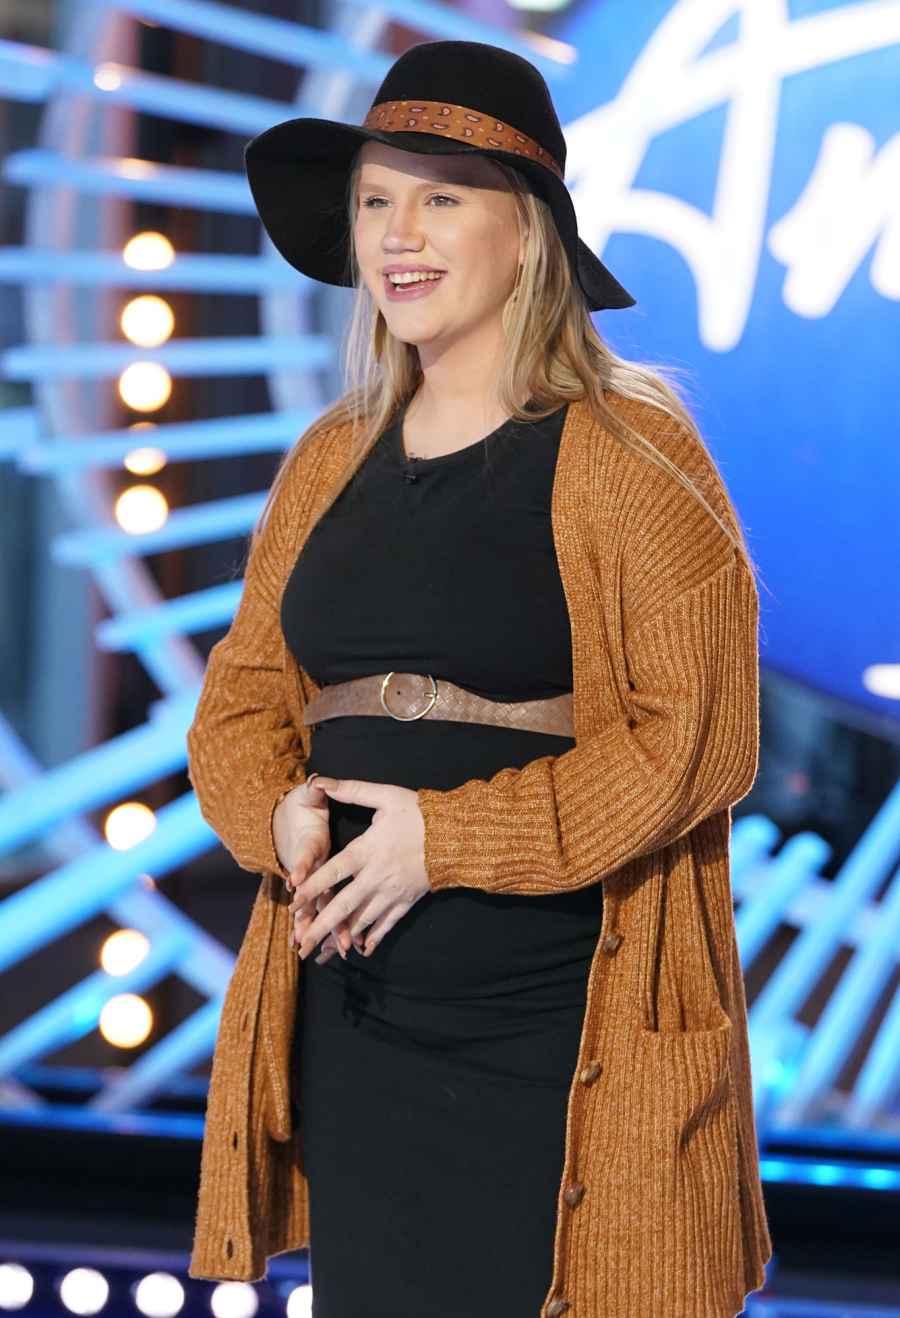 Who Is Haley Slayton 5 Things to Know About the American Idol Contestant Who Auditioned While 5 Months Pregnant